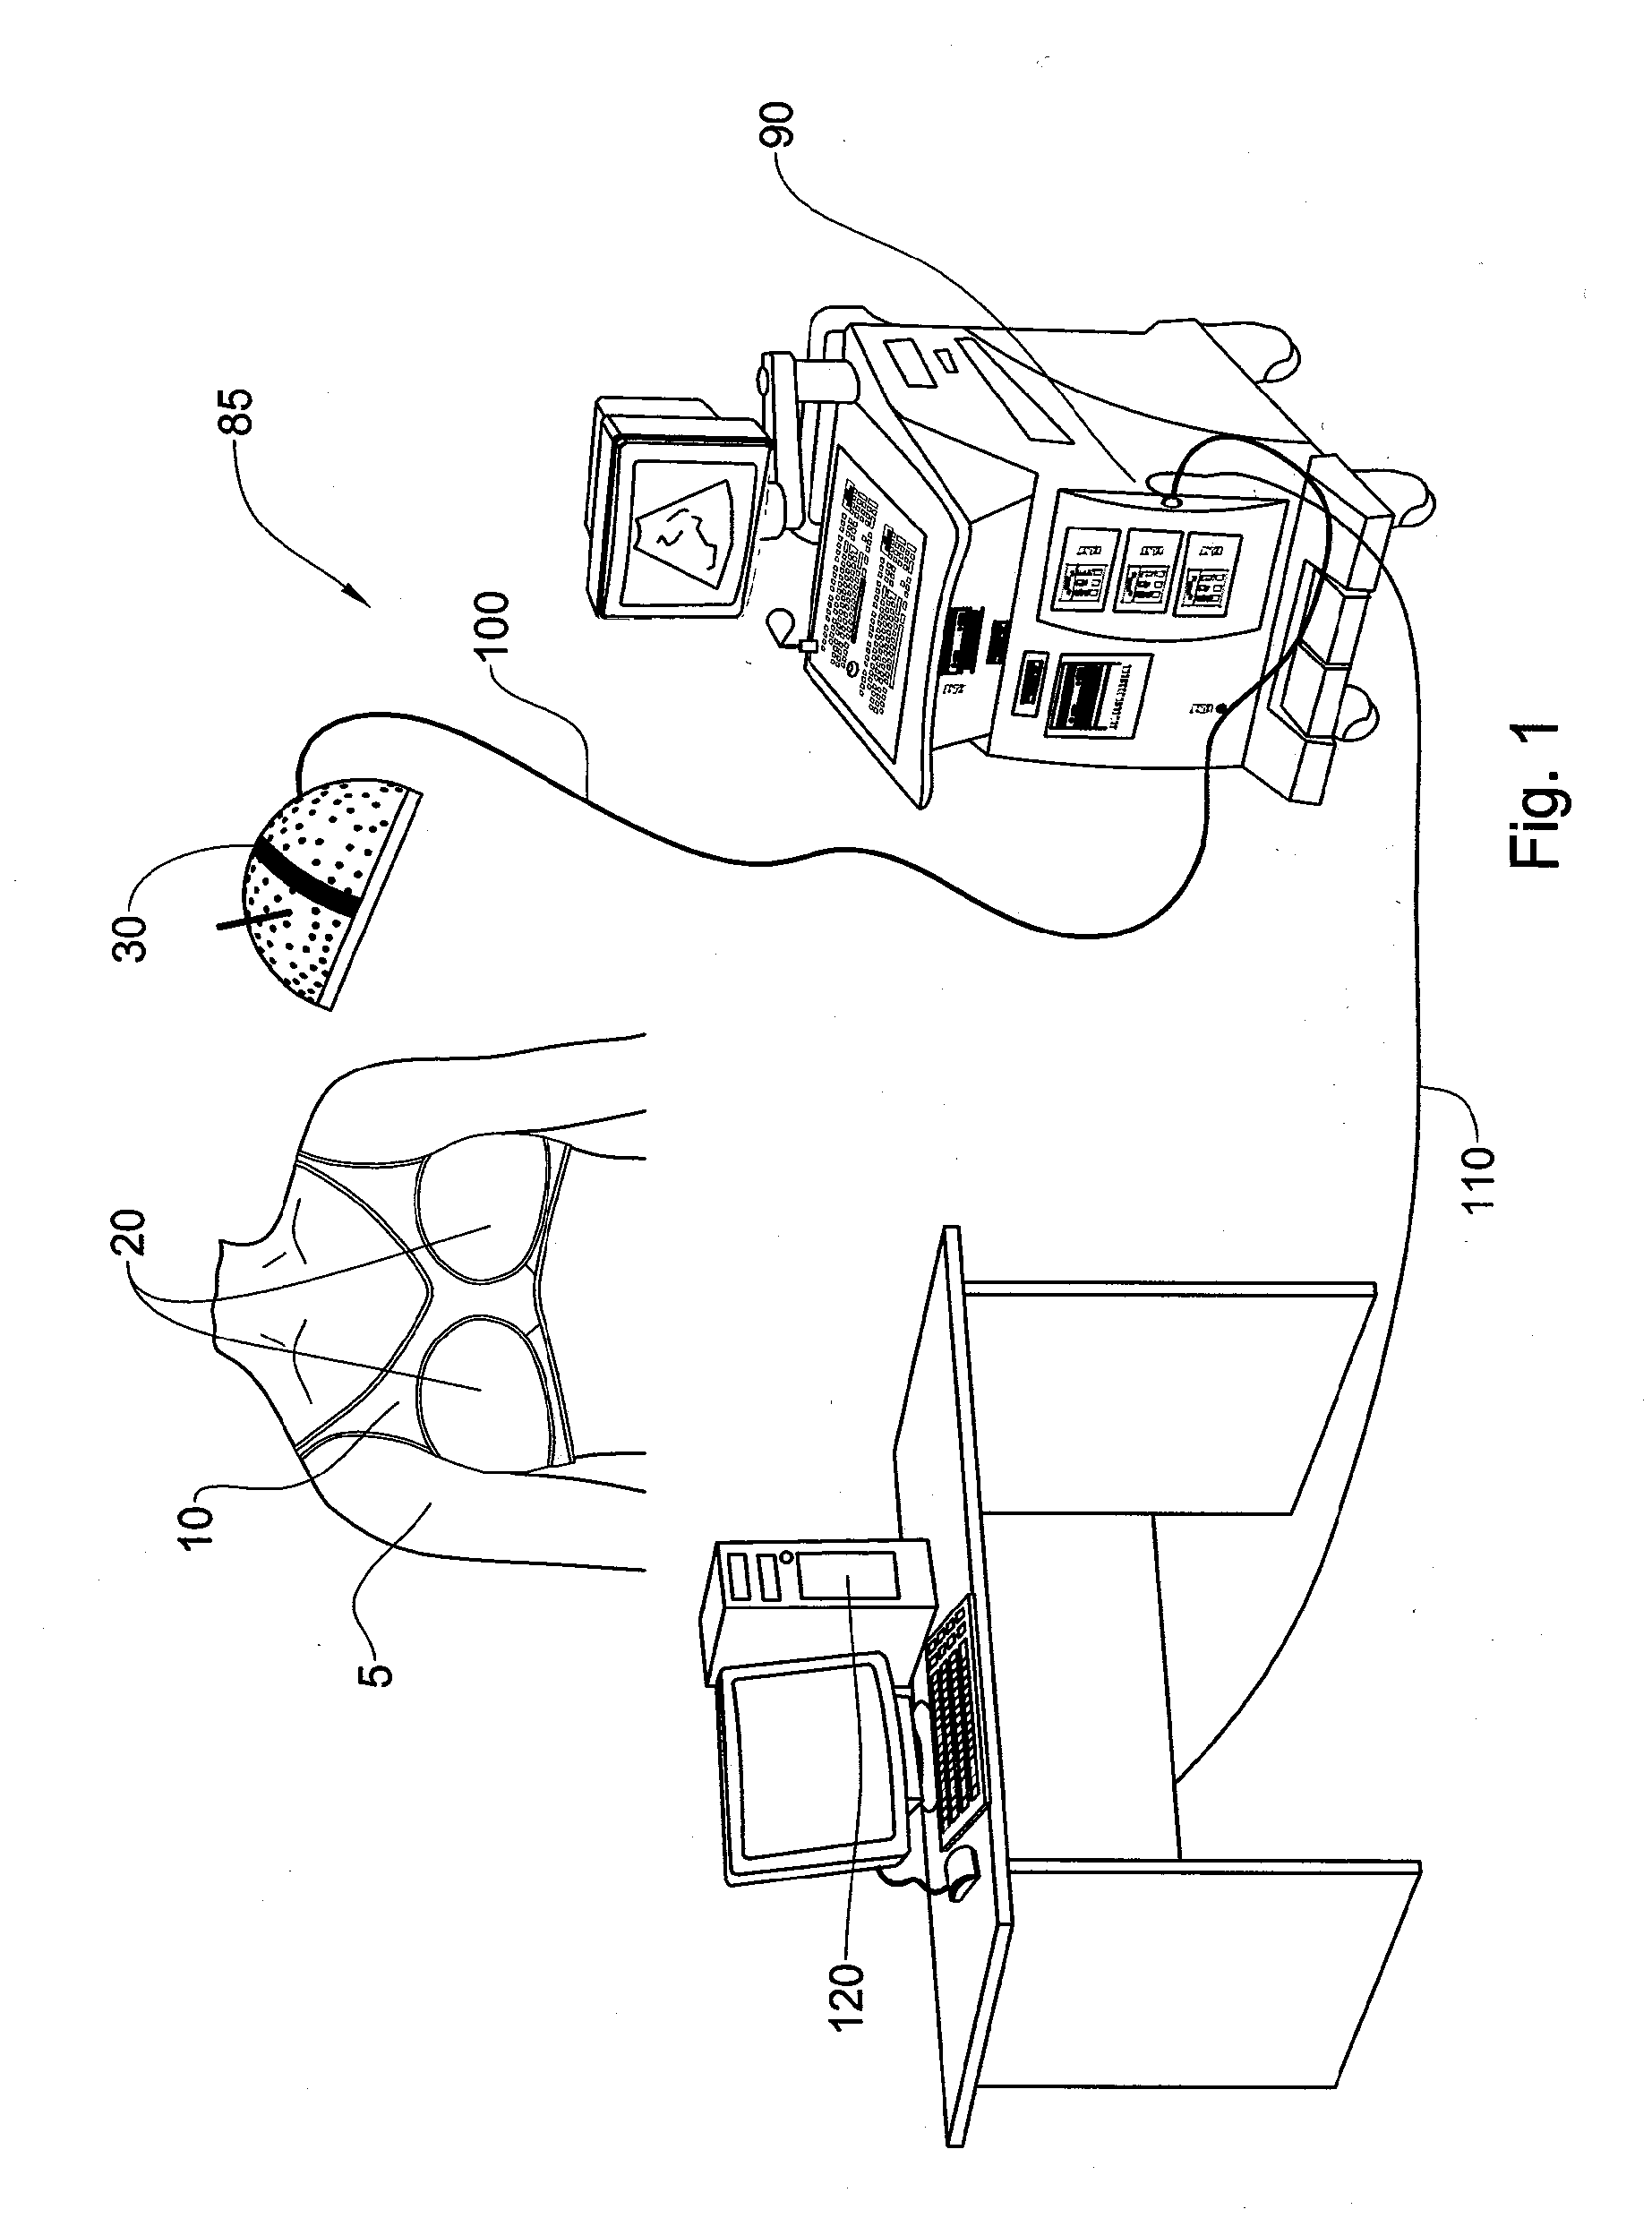 System and method for ultrasonic examination of the breast